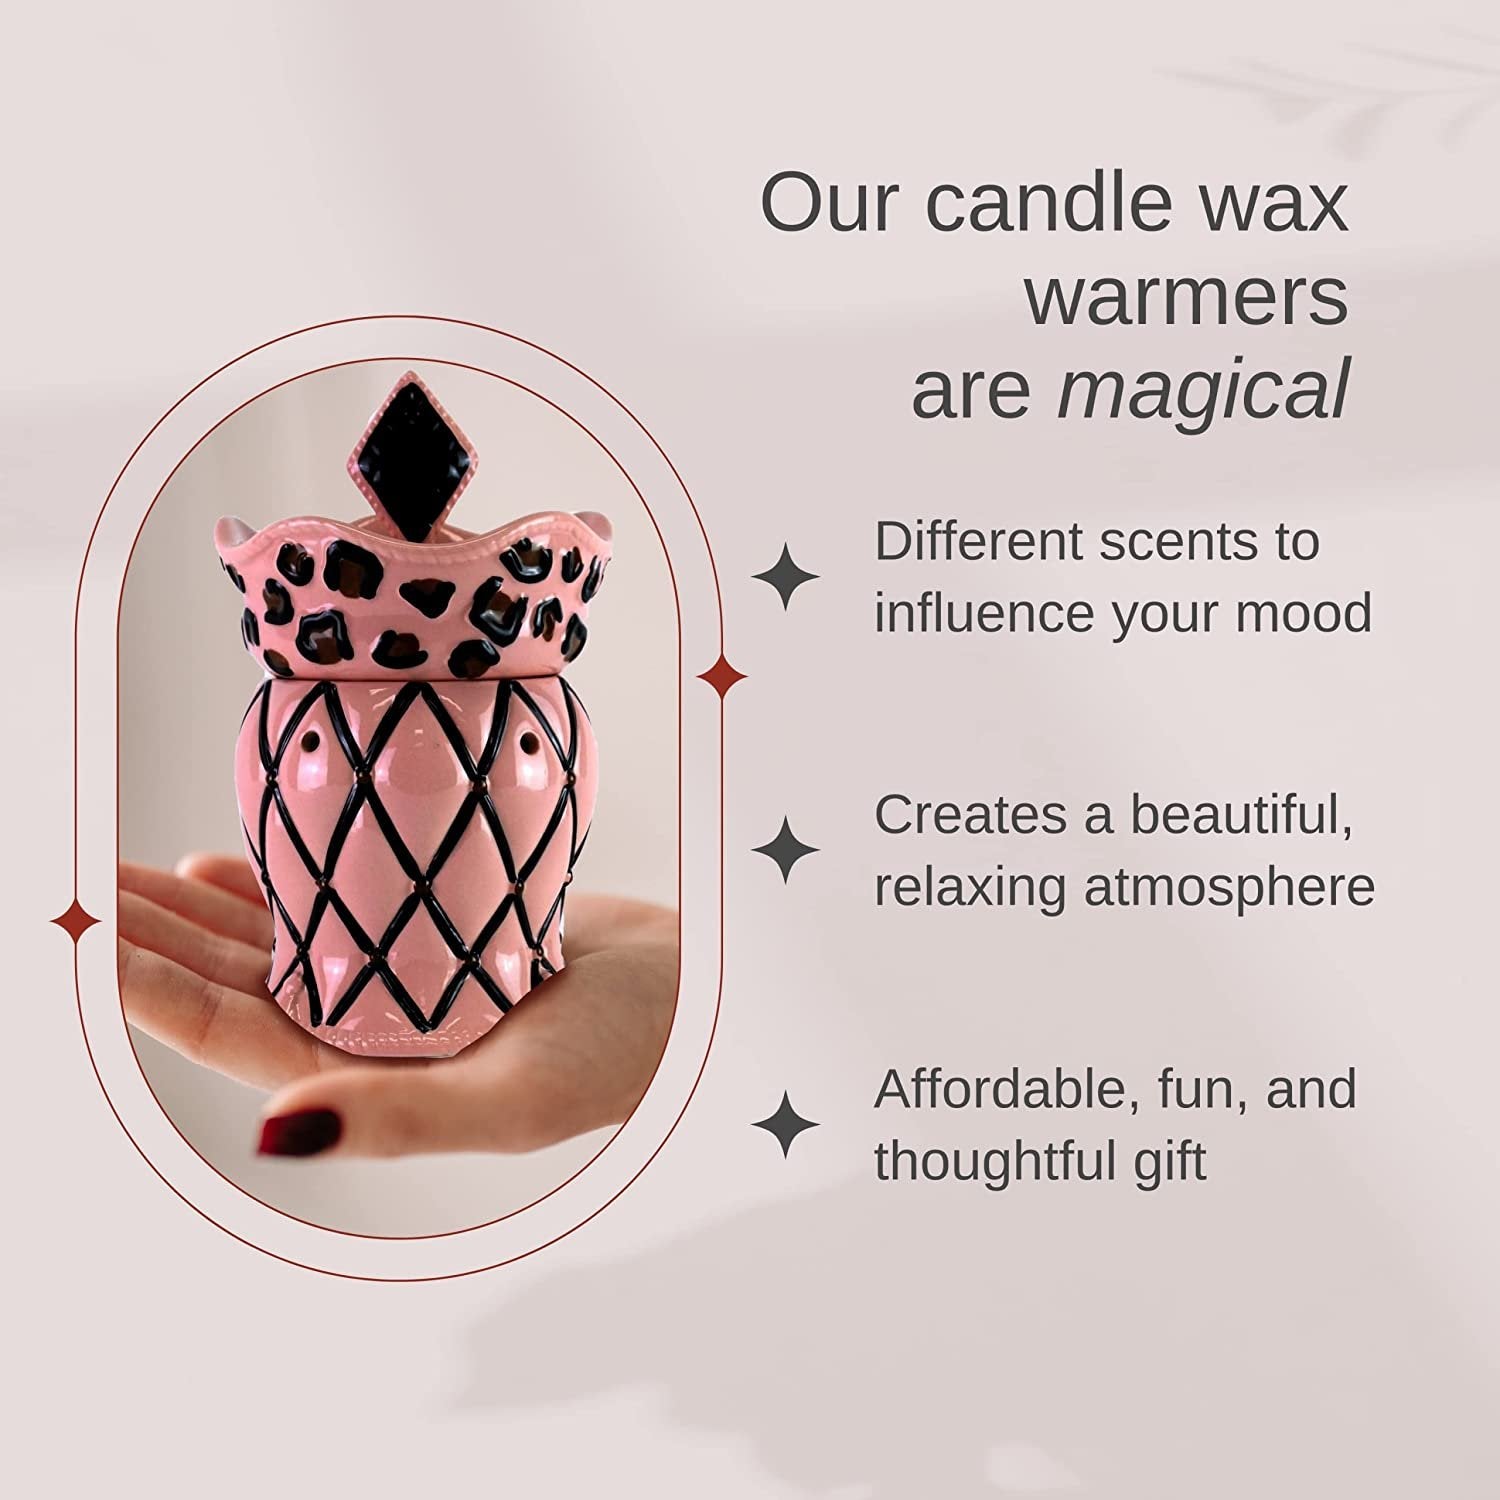 Tyler Candle Company Diva Candle Wax Melt Warmer - Home Decor Candle Accessories with Included 6 Wax Melts - Chained Leopard Pink Fragrance Wax Warmer - 5.5 x 5" in with Bonus Key Chain